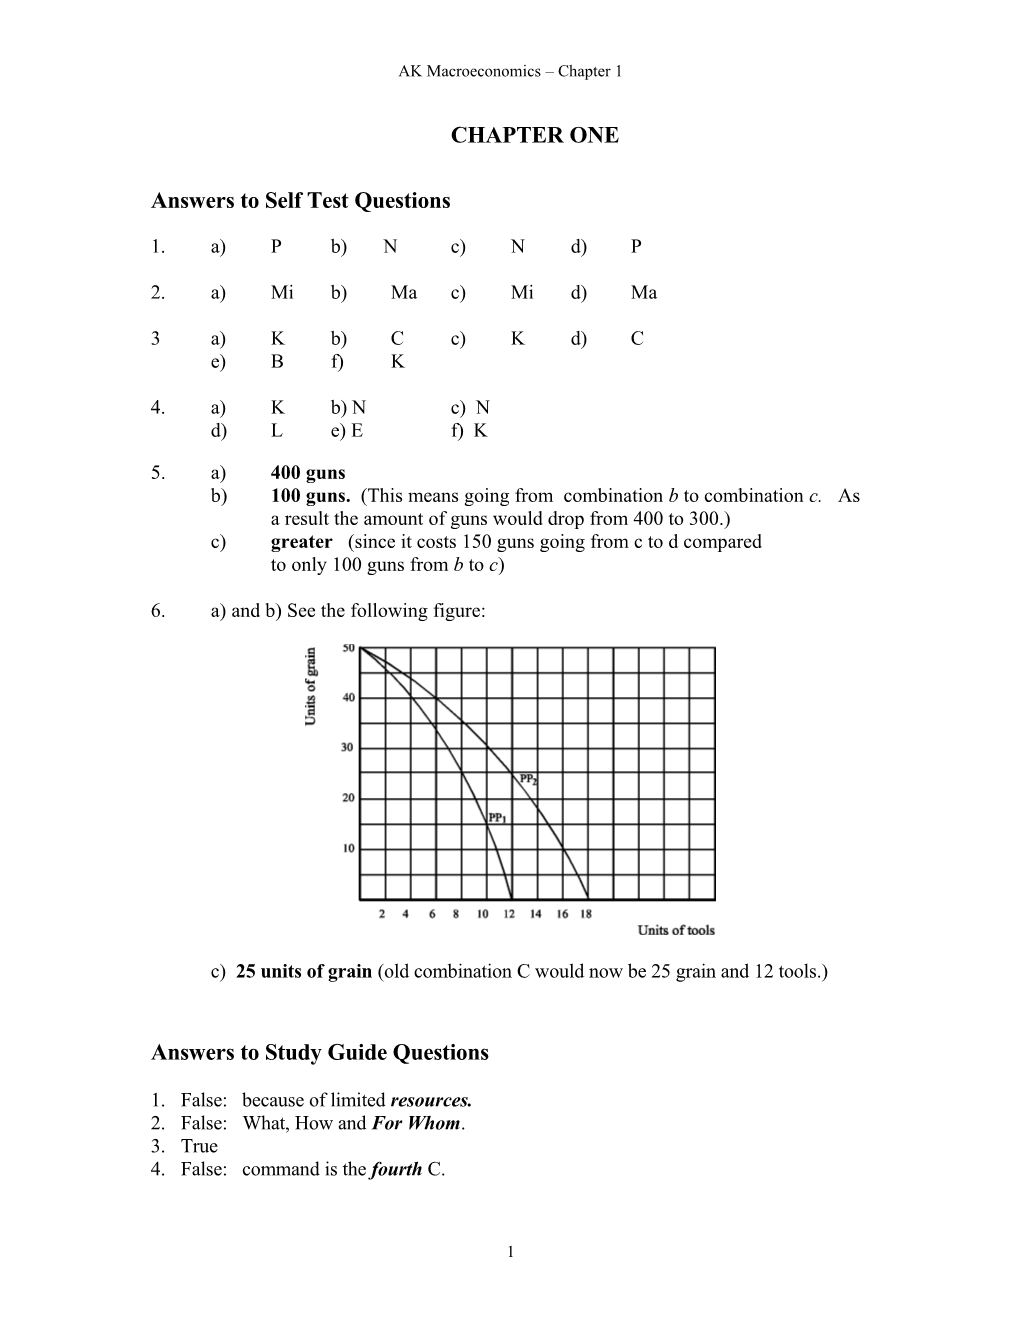 Answers to Self Test Questions s1